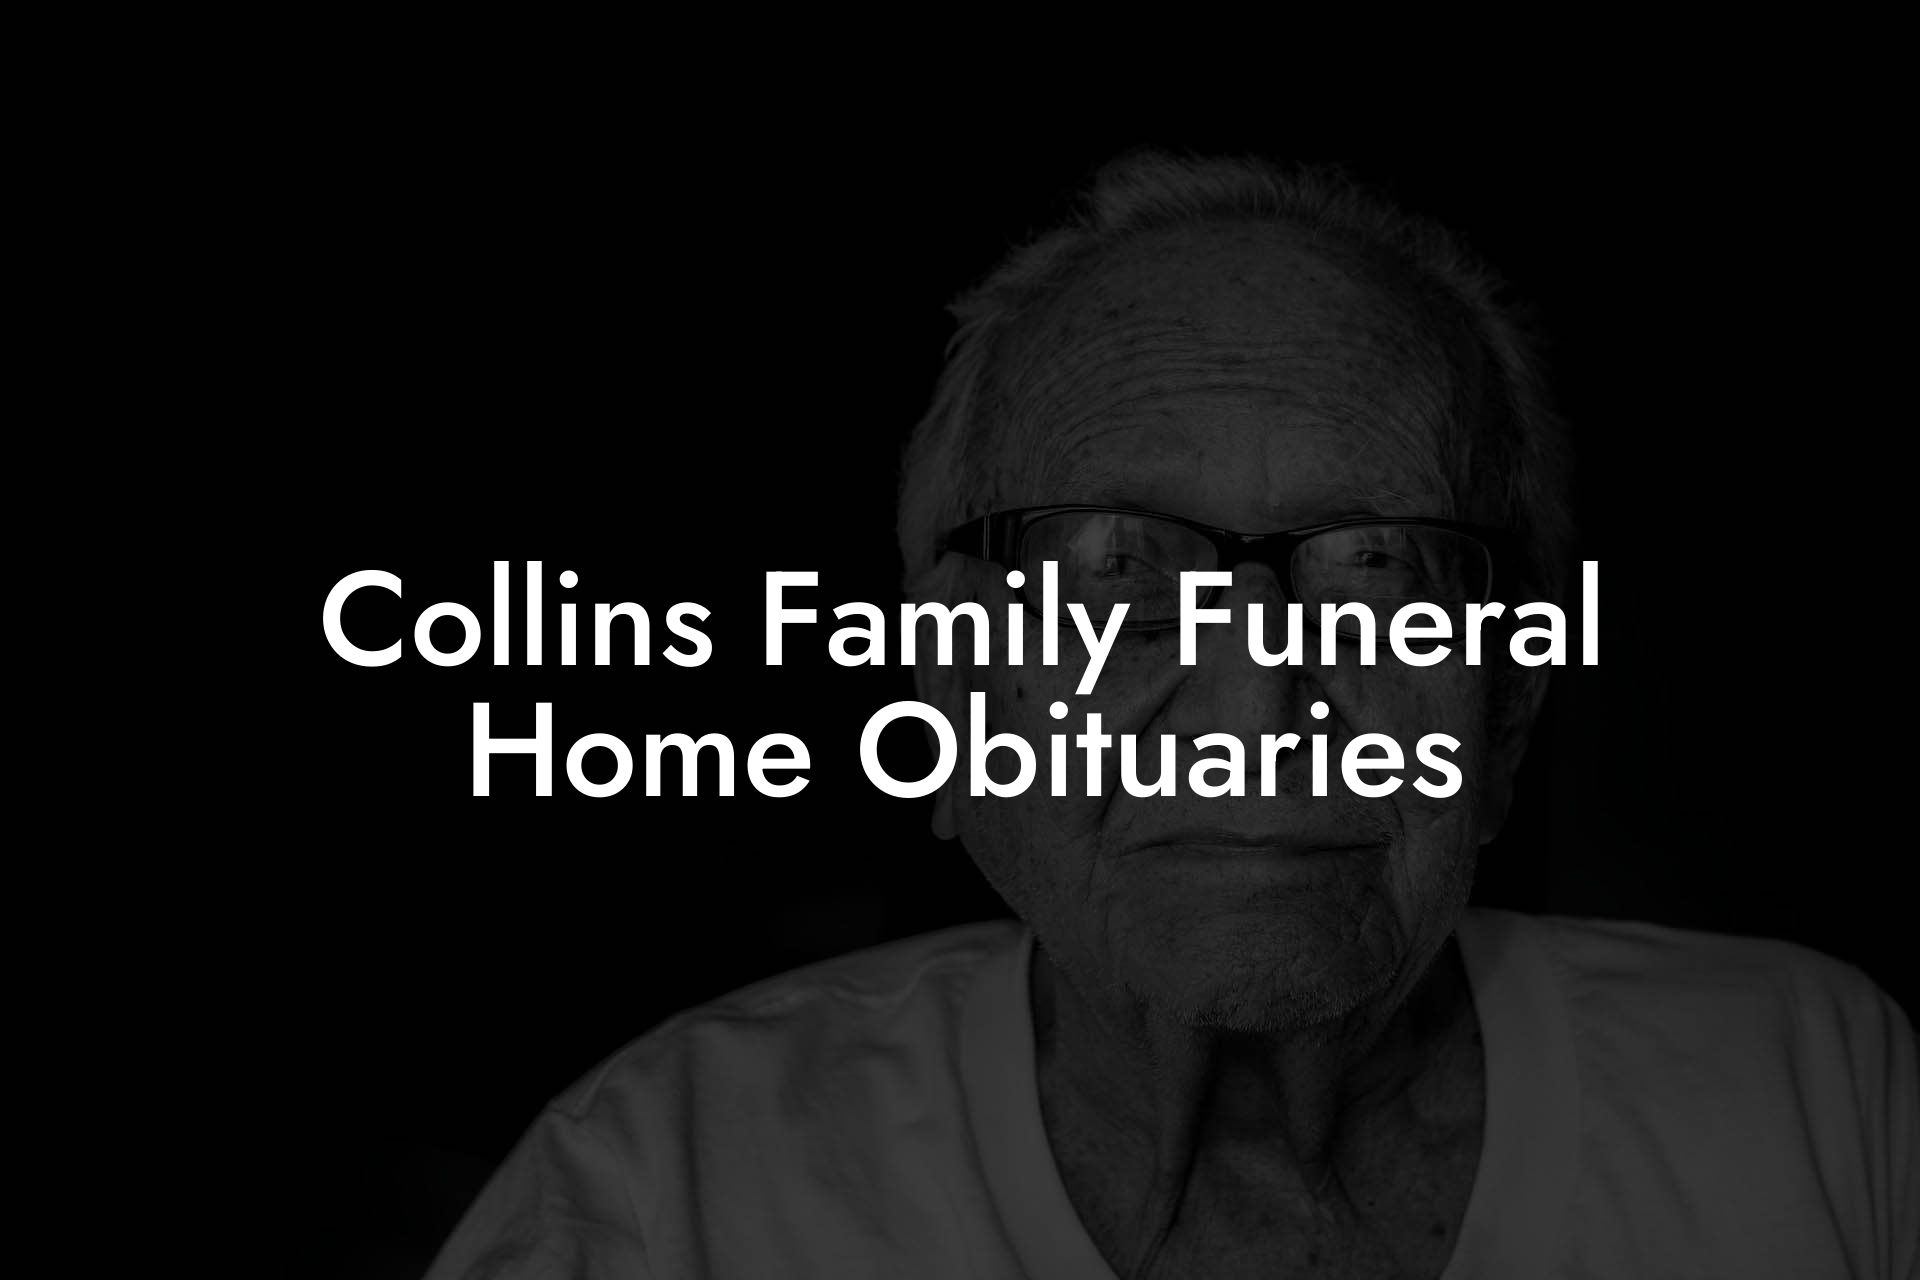 Collins Family Funeral Home Obituaries